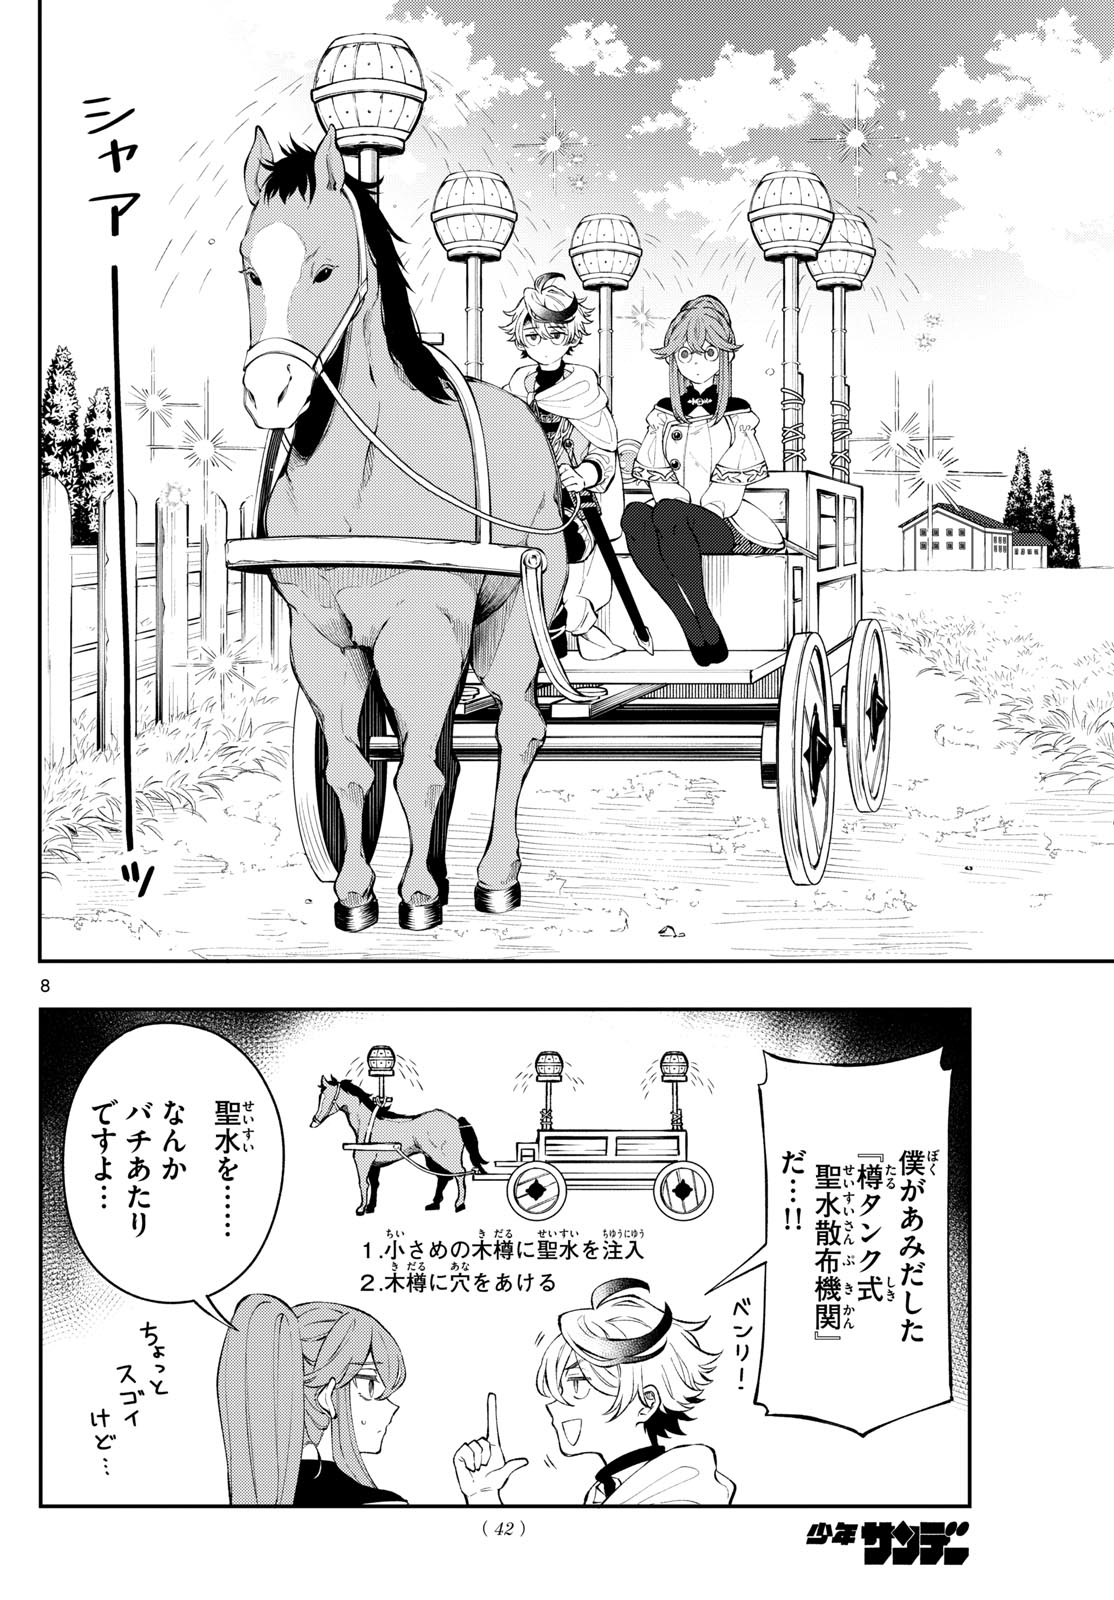 Albus Changes the World 廻天のアルバス 第3話 - Page 8